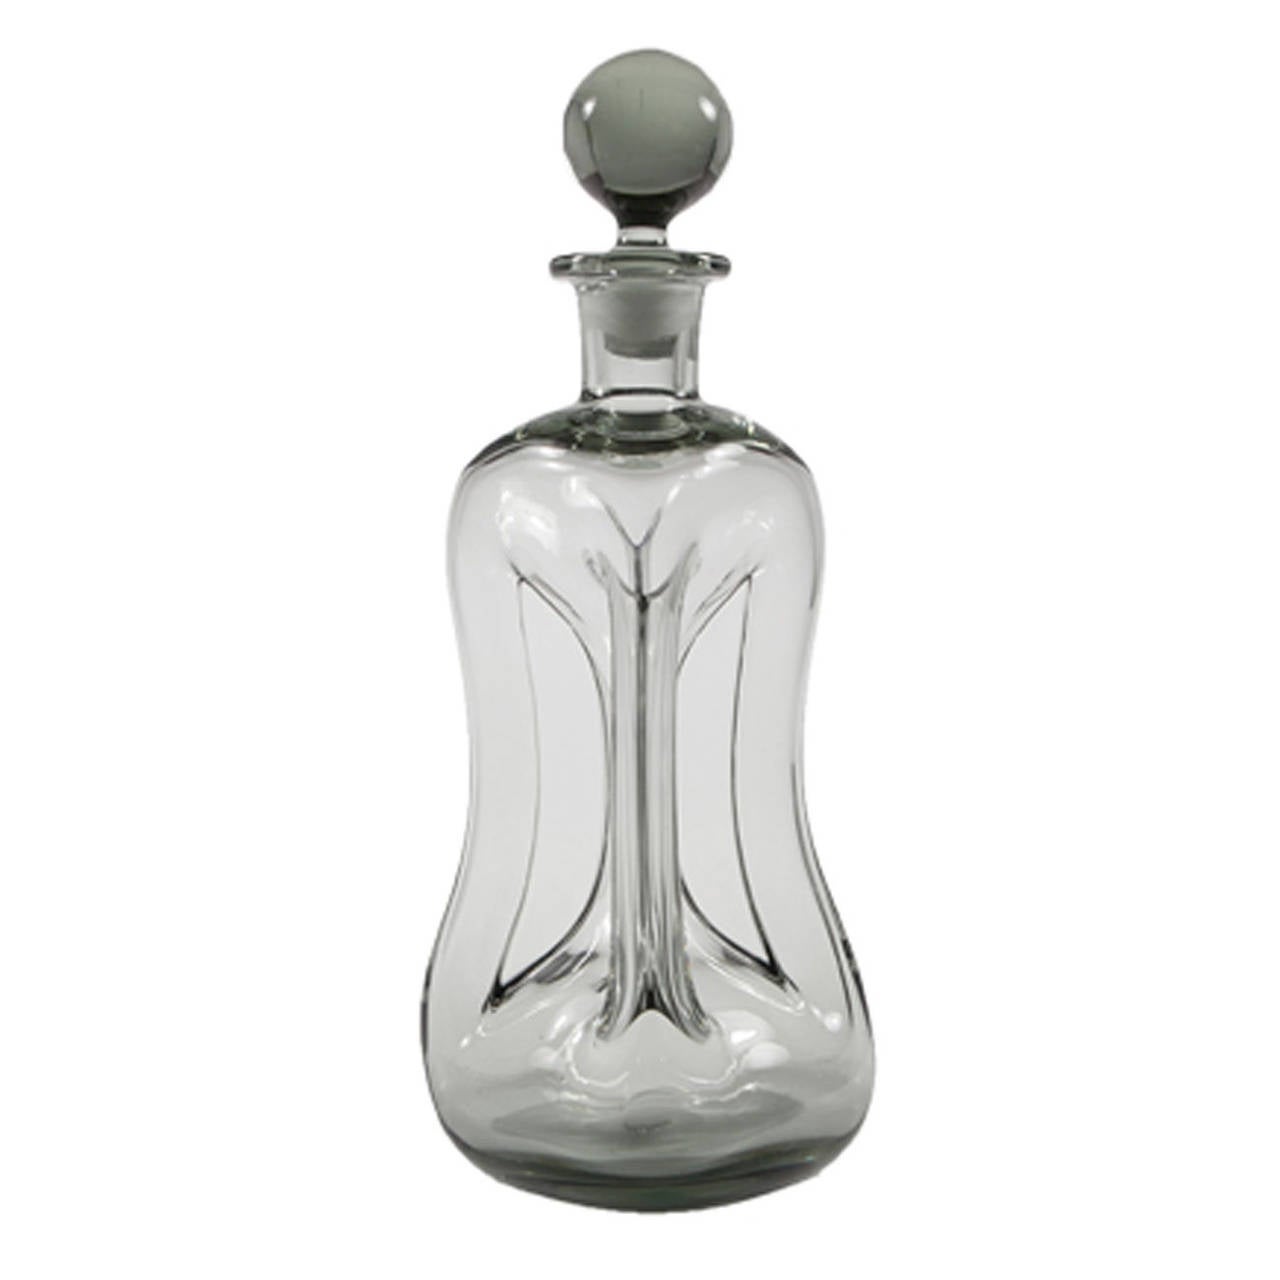 A smoky grey sculptural glass decanter with ball stopper.